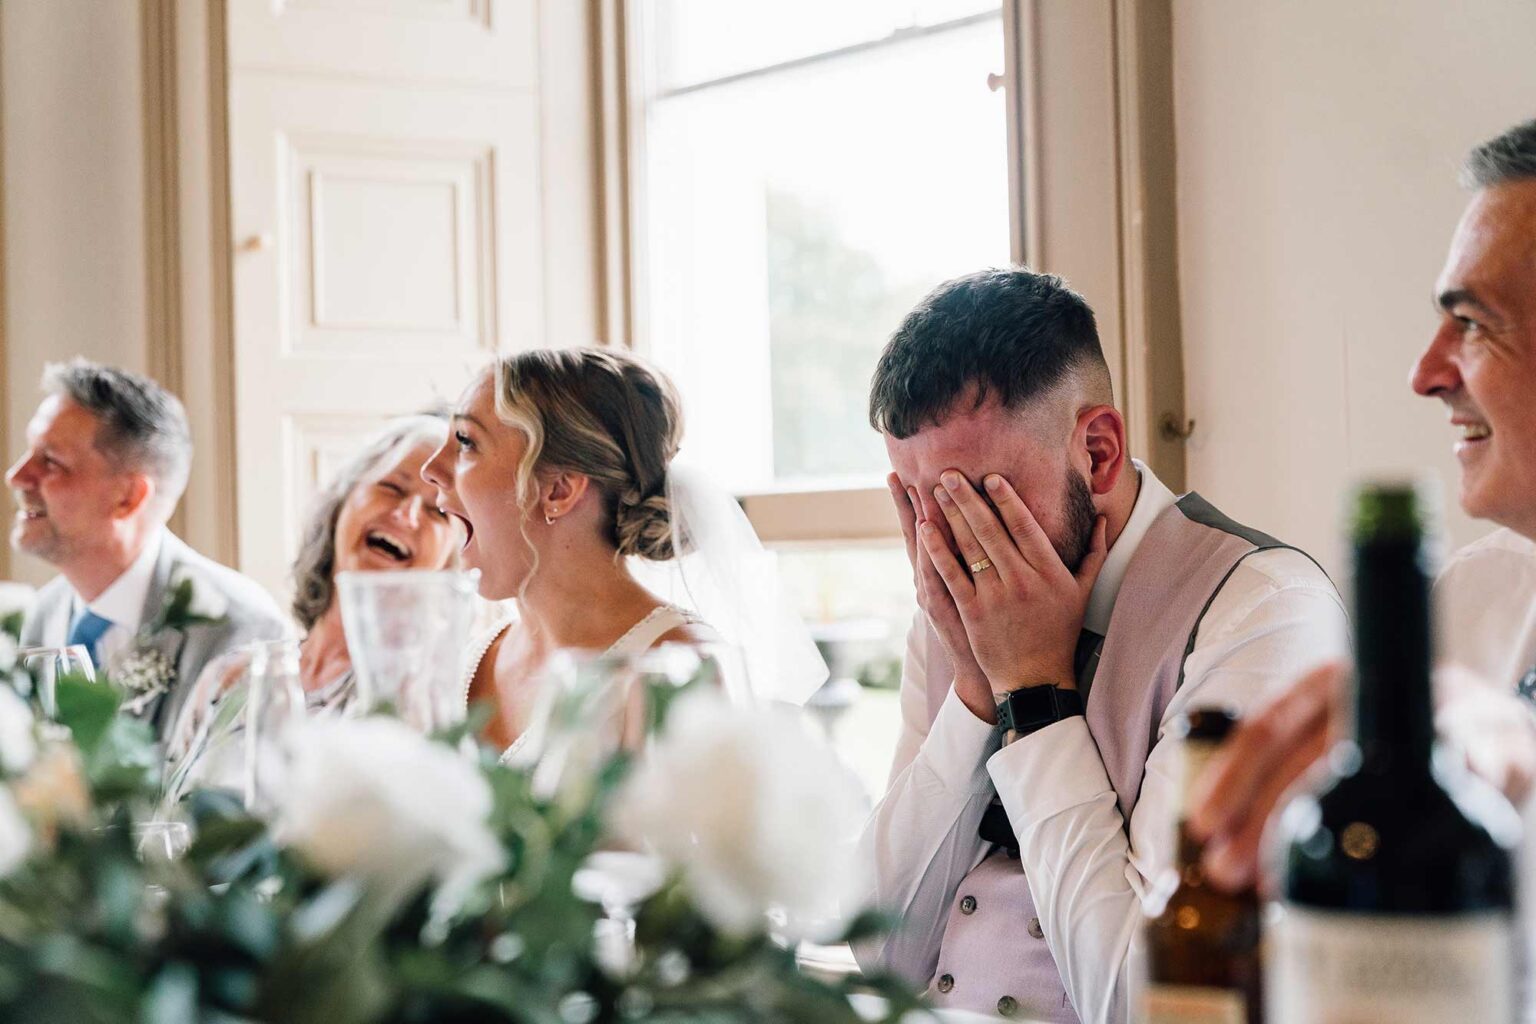 Brides shock reaction to grooms story during best man speech, groom has his hands in face out of disbelief, wedding is at crowcombe court, somerset.